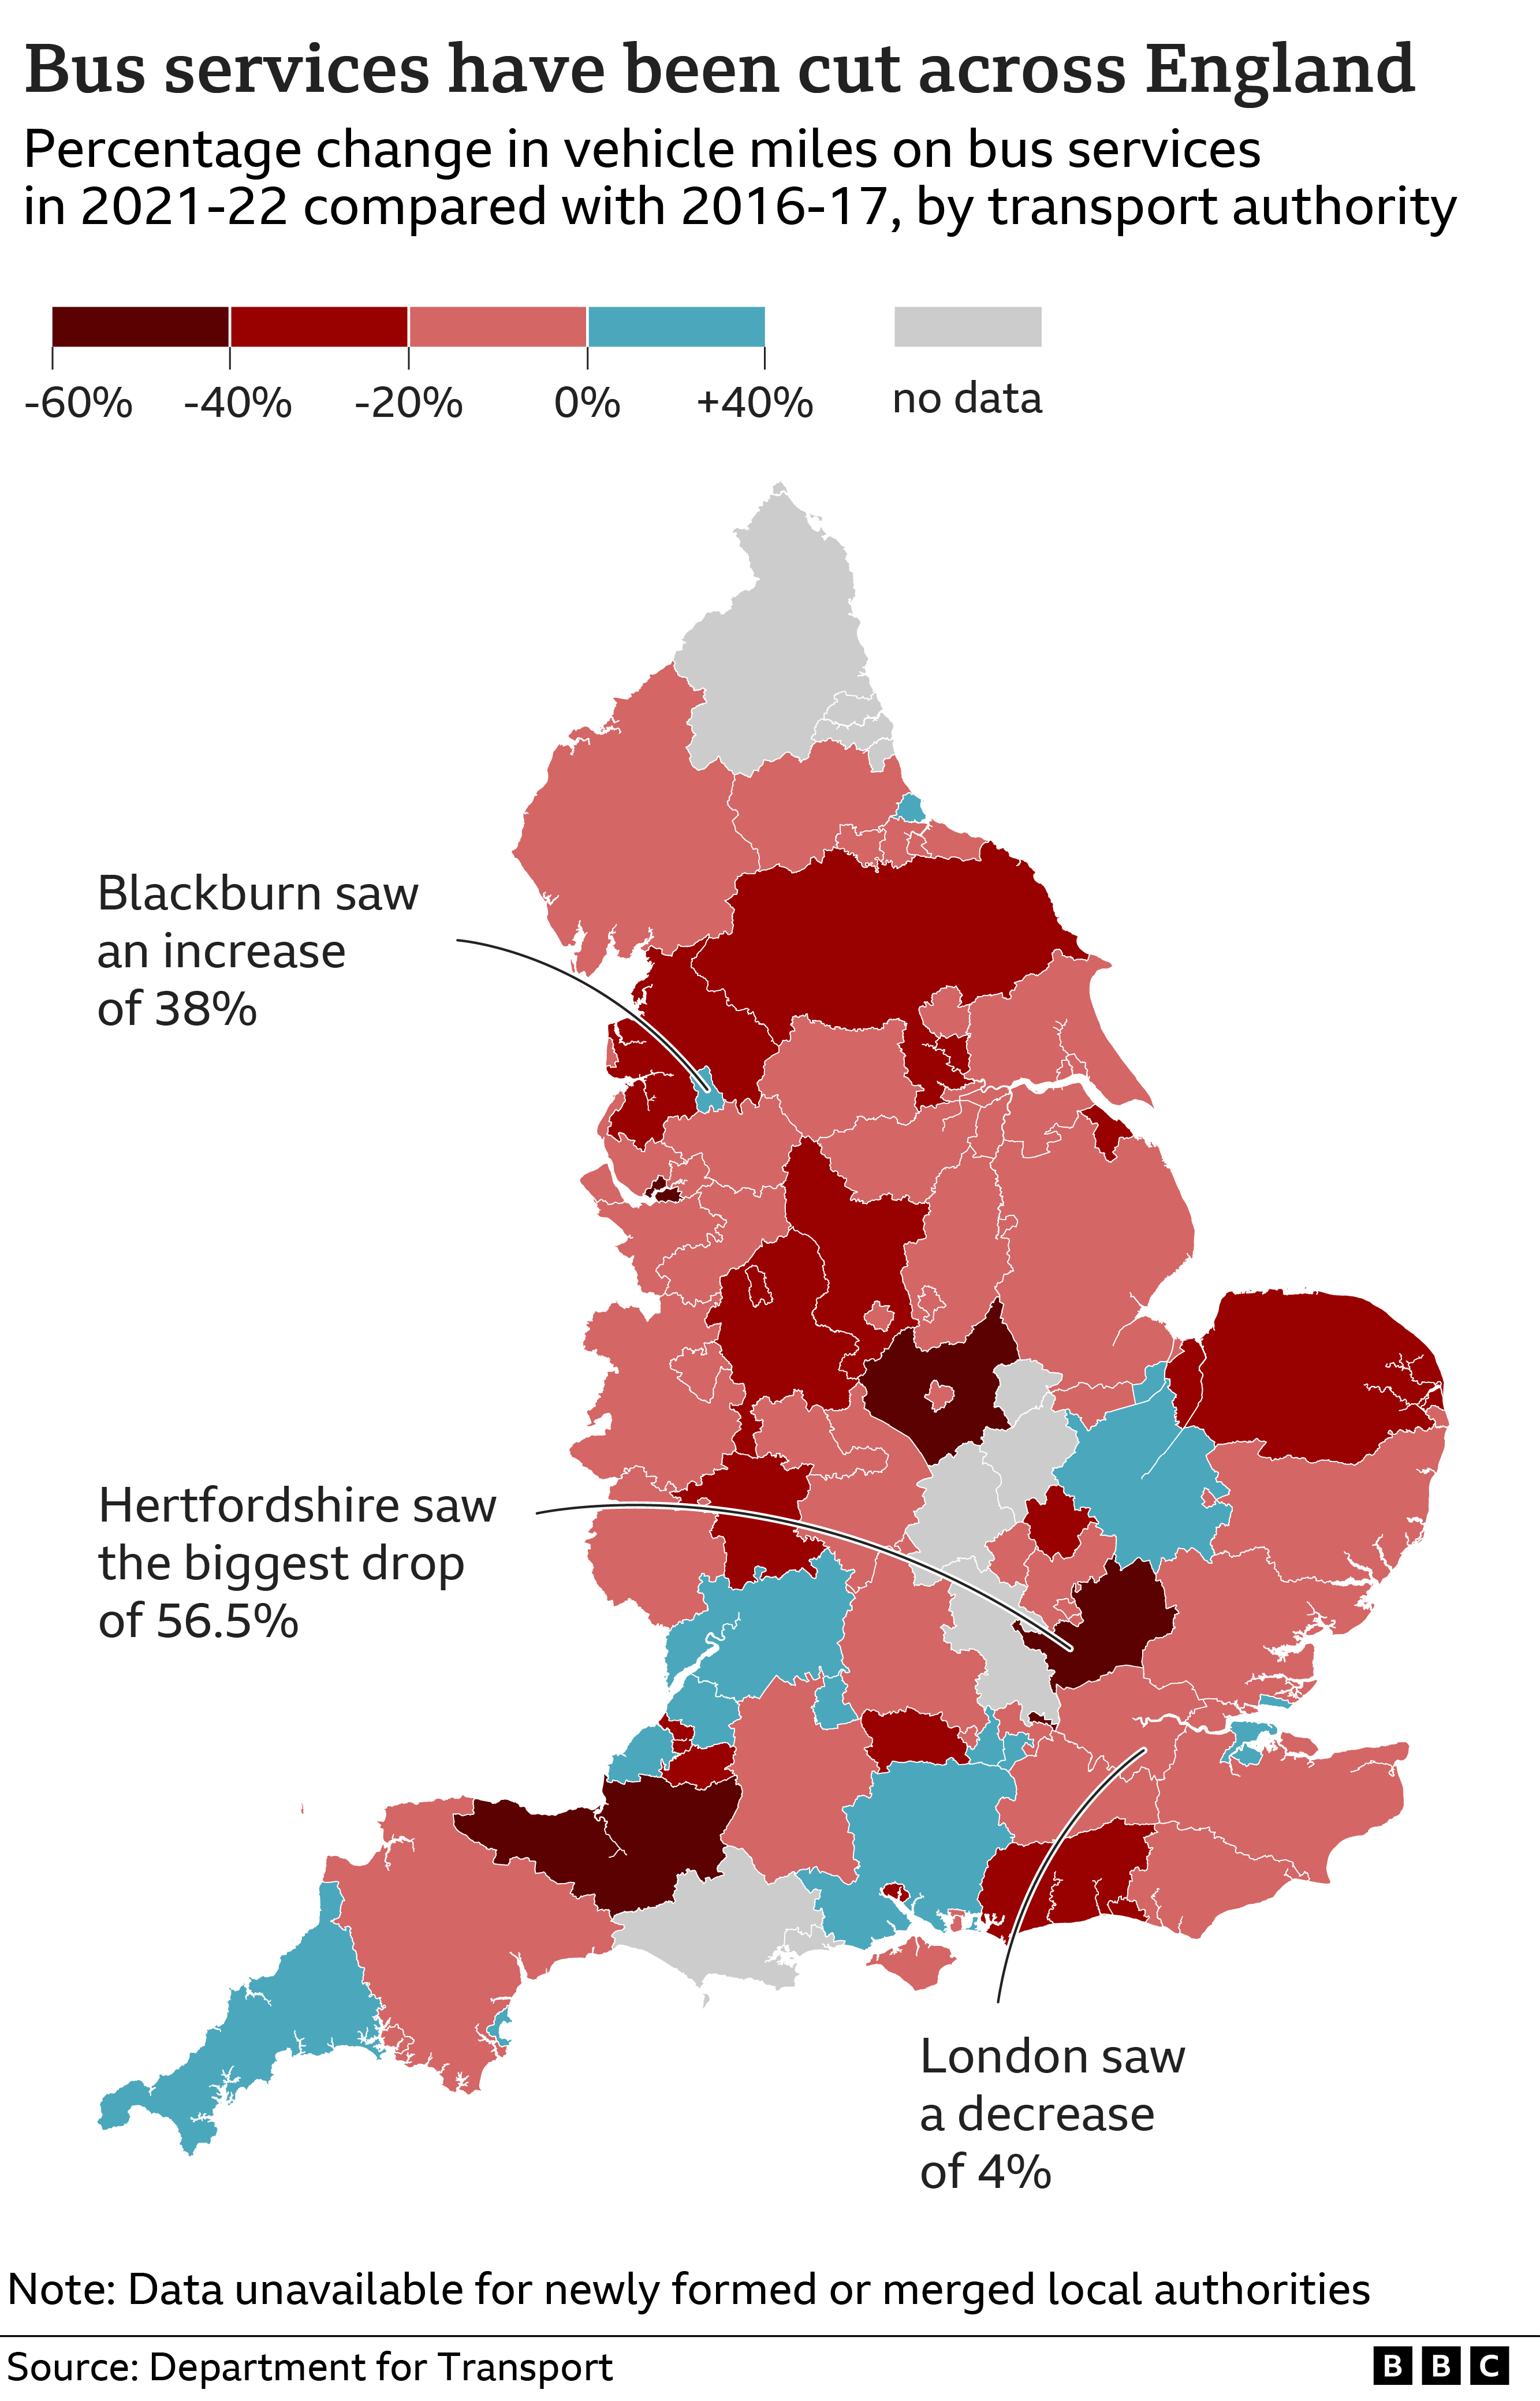 Map of England divided by local transport authority areas, it shows the percentage change in vehicle miles travelled on bus networks in each area between 2016-17 and 2021-22, most areas have seen a decline over the five year period with Hertfordshire seeing the biggest drop of 56.6%, while Blackburn saw an increase by 38%